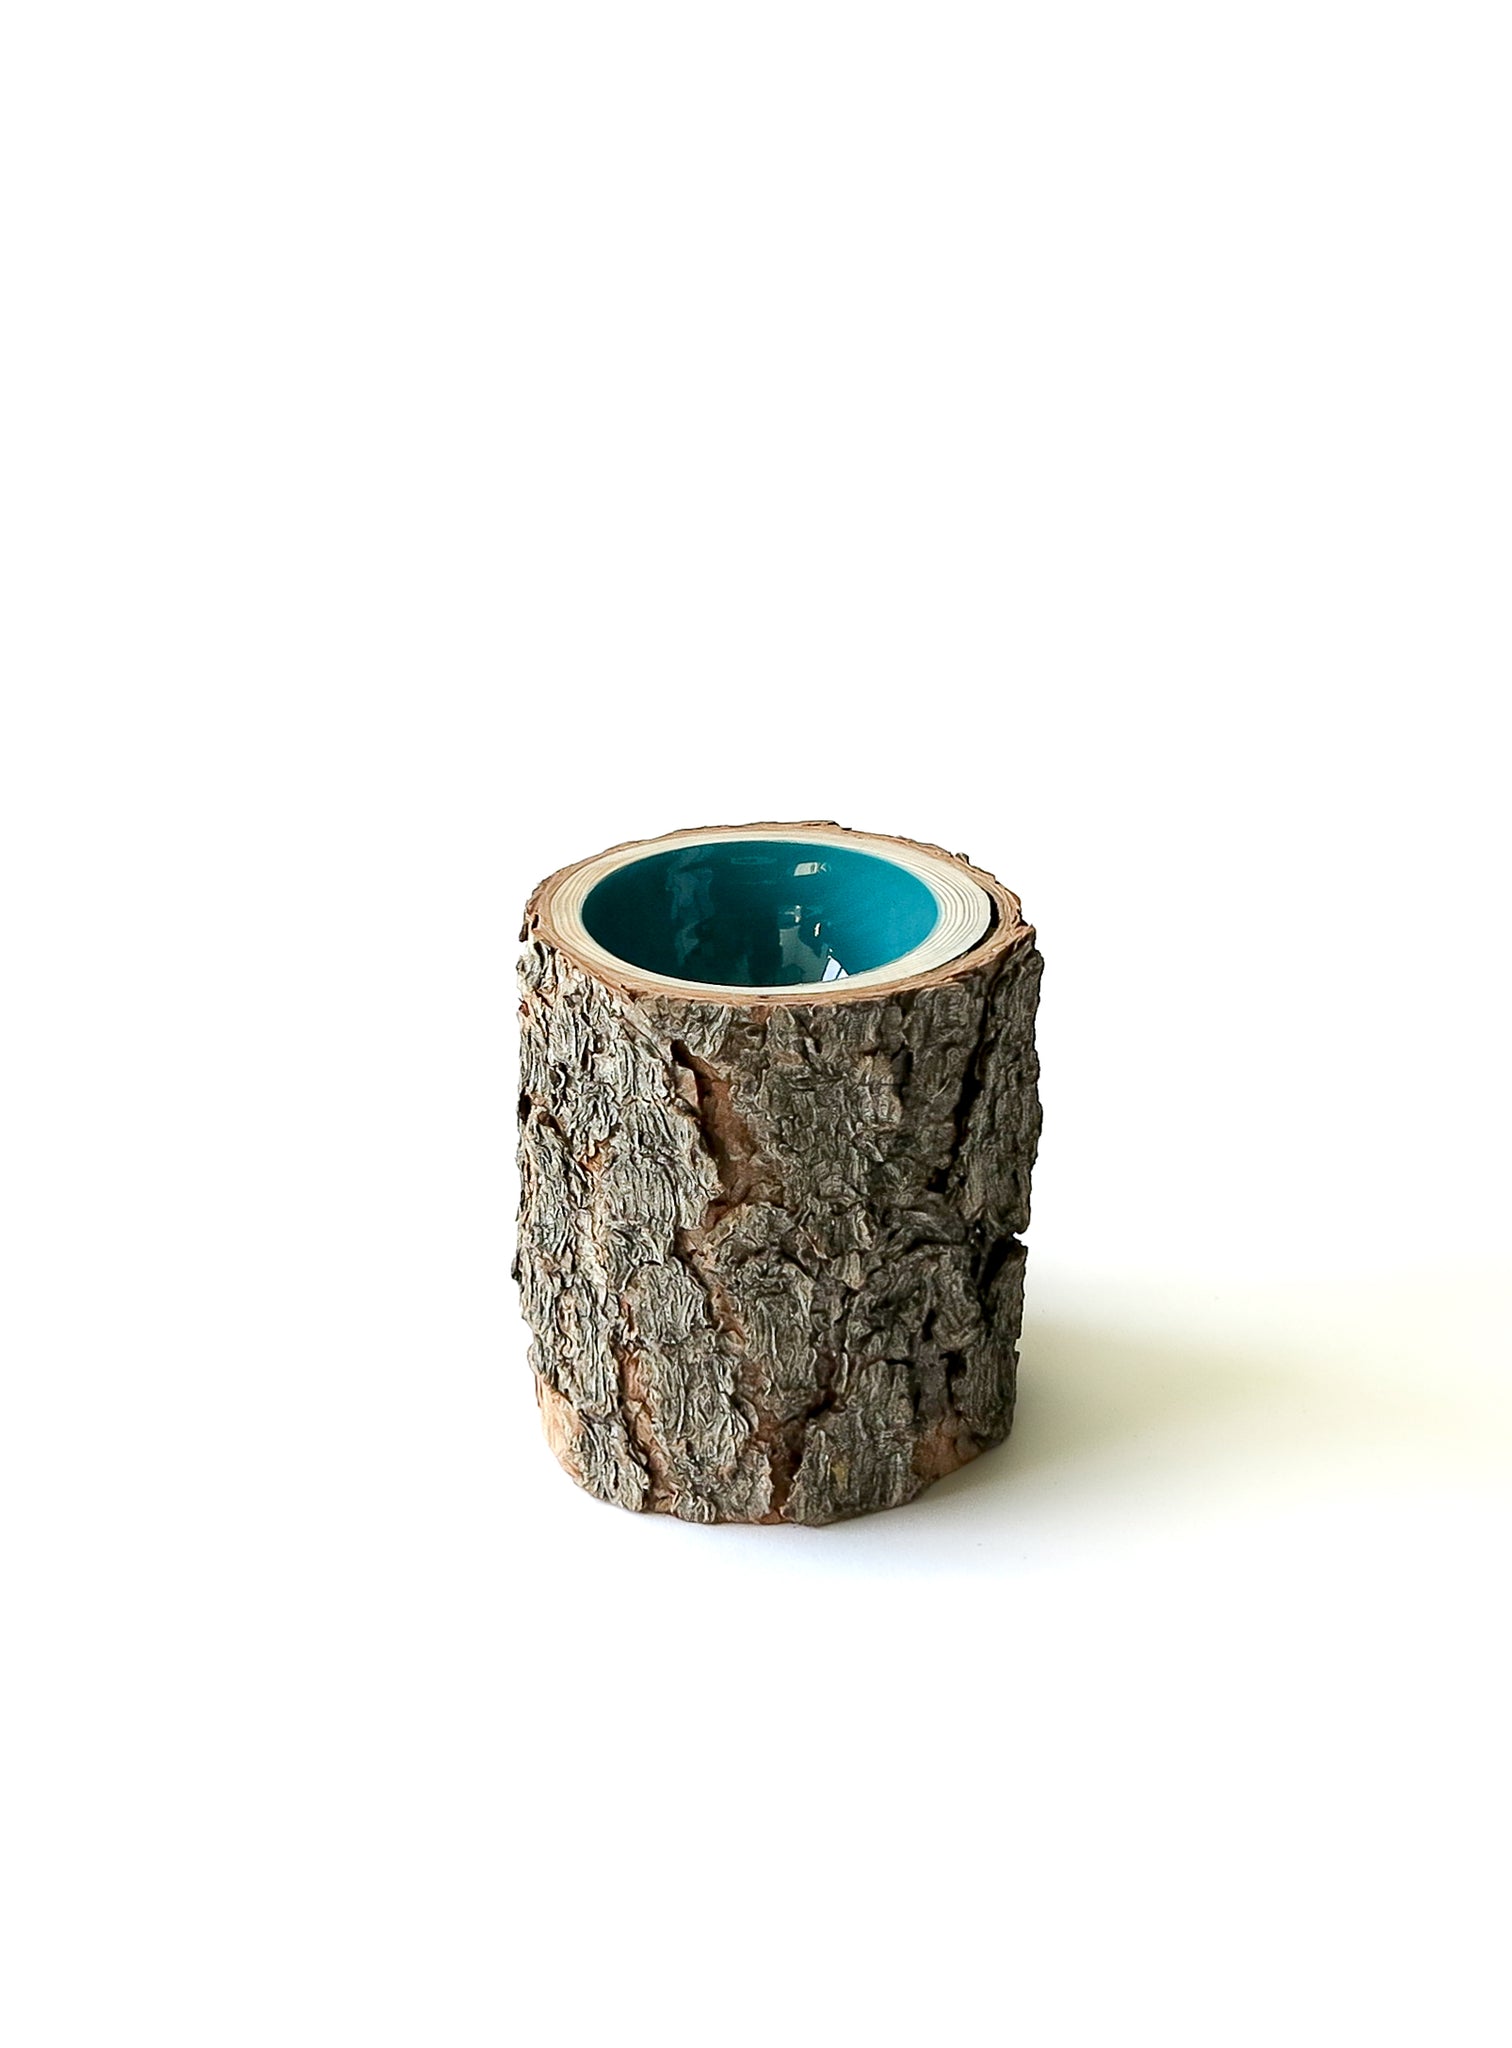 Size 2 Log Bowl - extra small wooden bowl with pine bark, glossy interior is a turquoise colour.